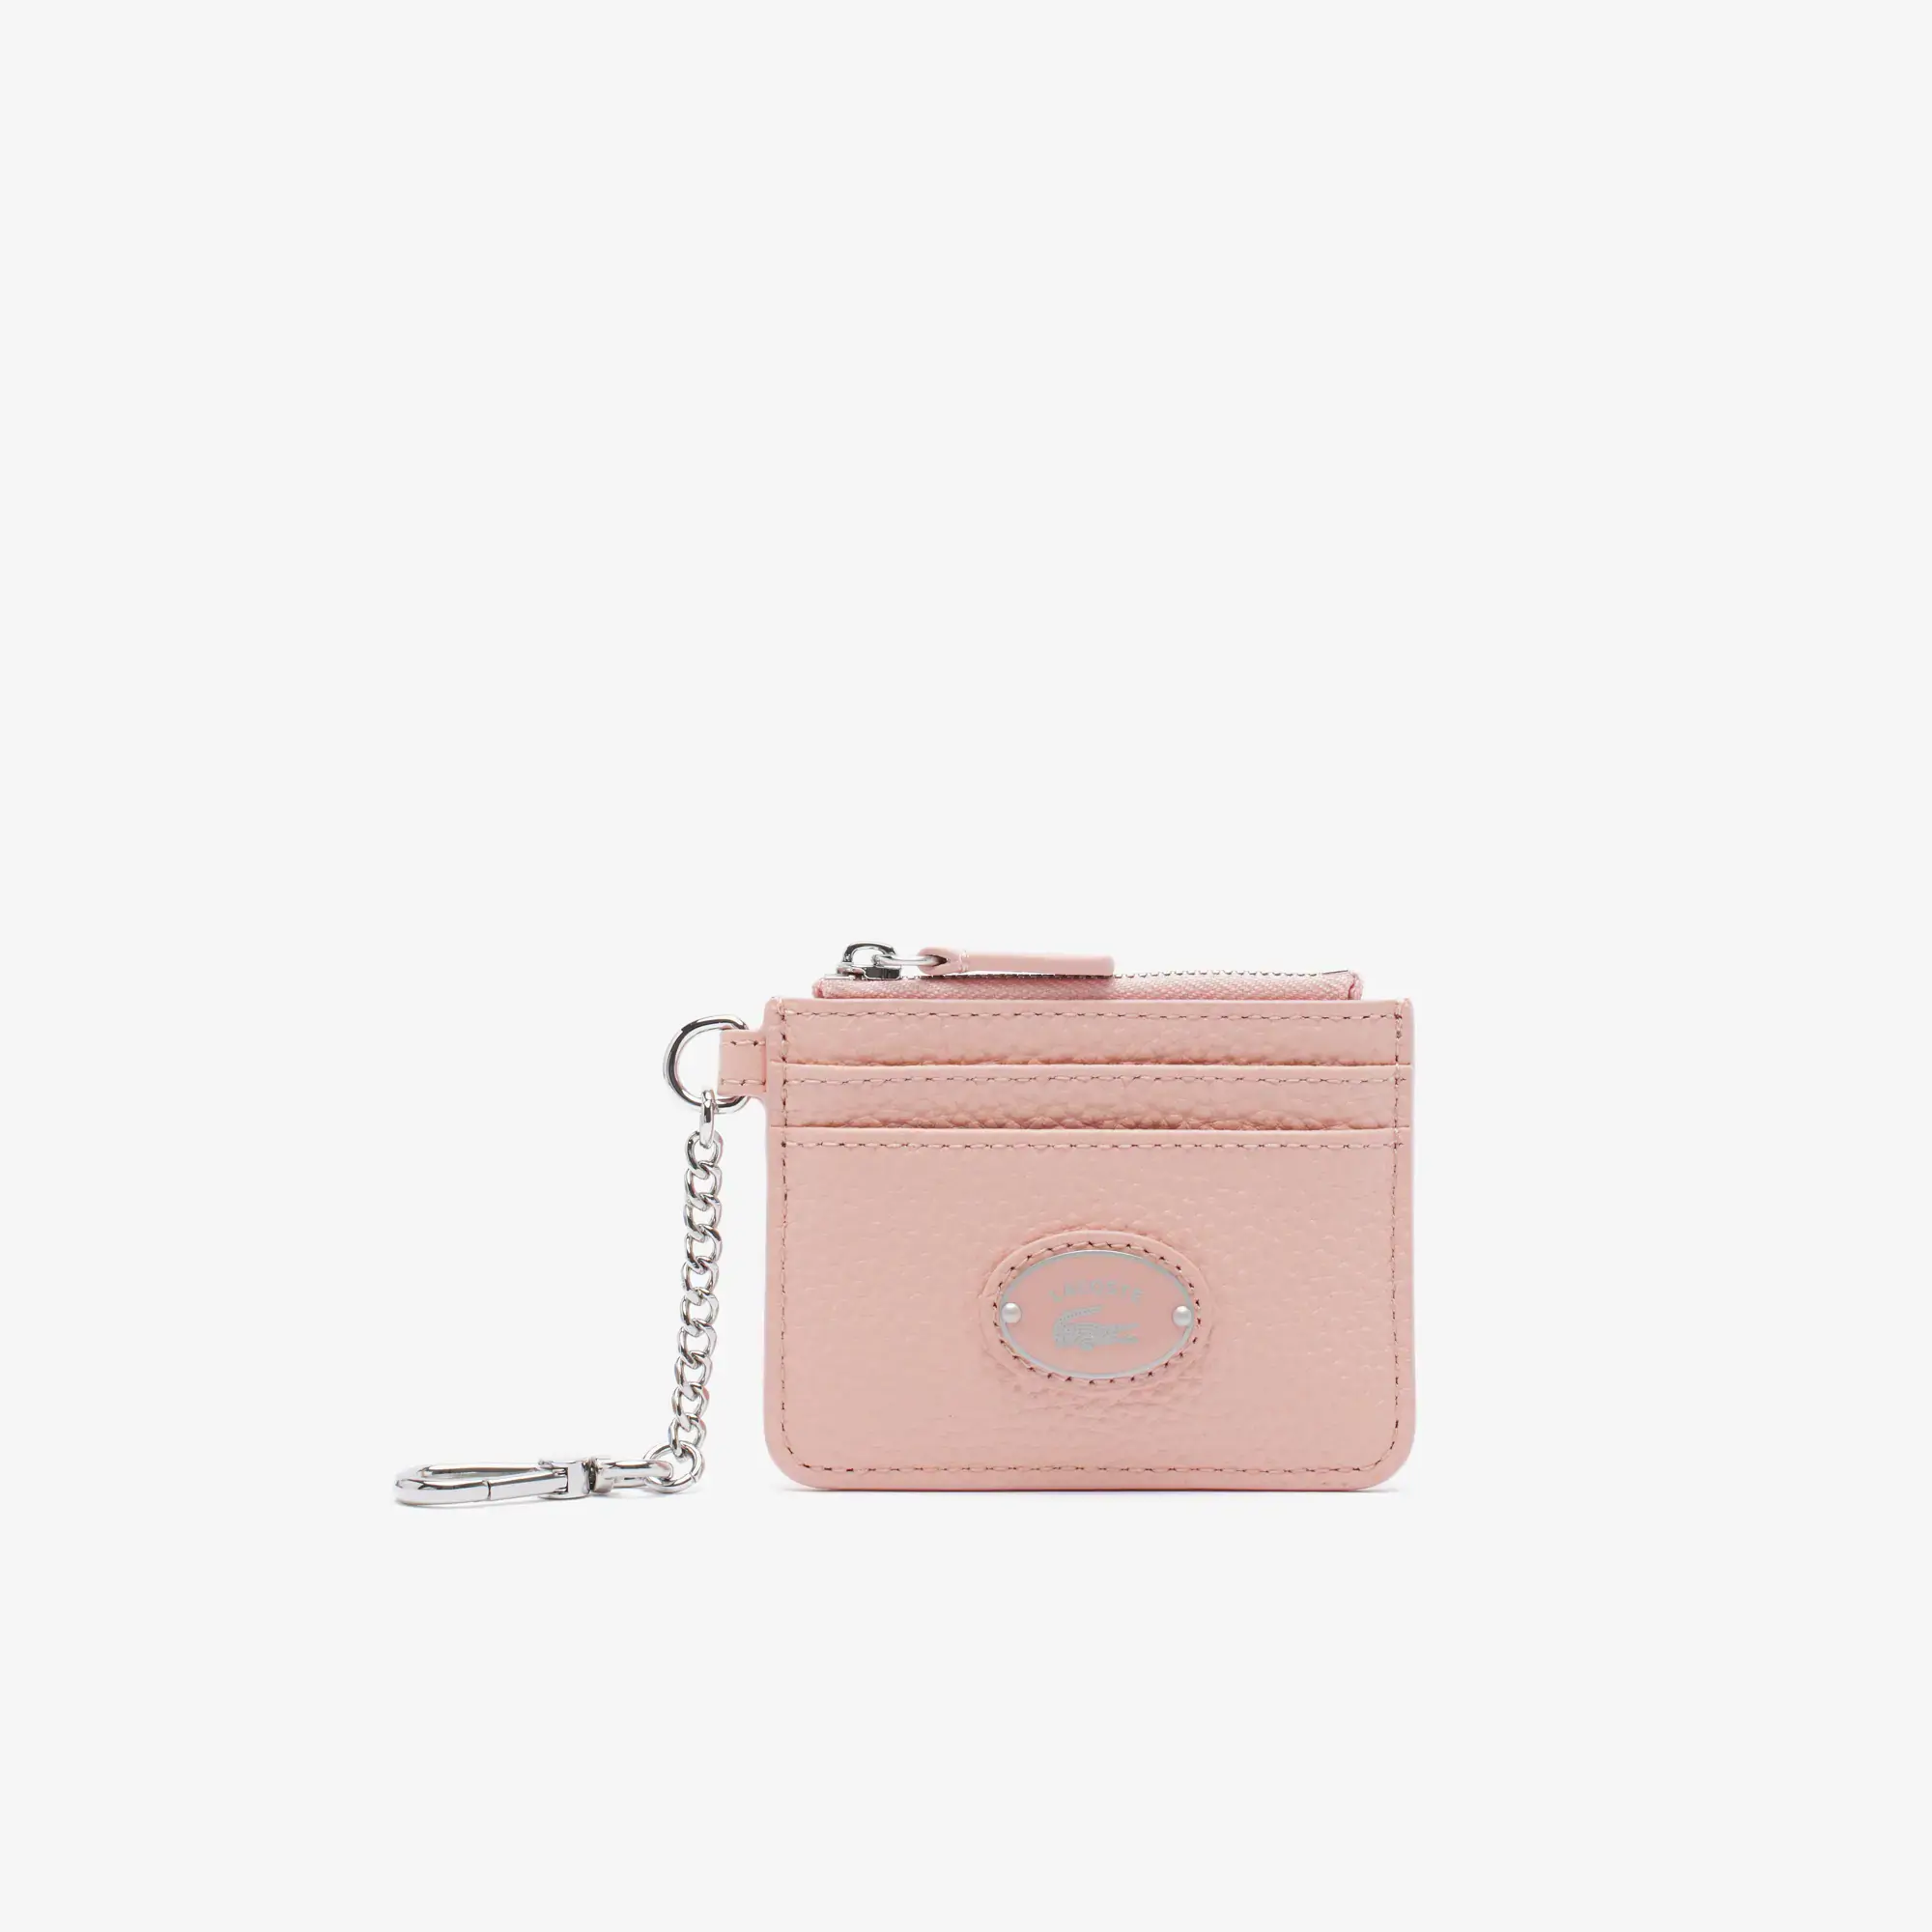 Lacoste Women's Snap Hook Grained Leather Card Holder. 1